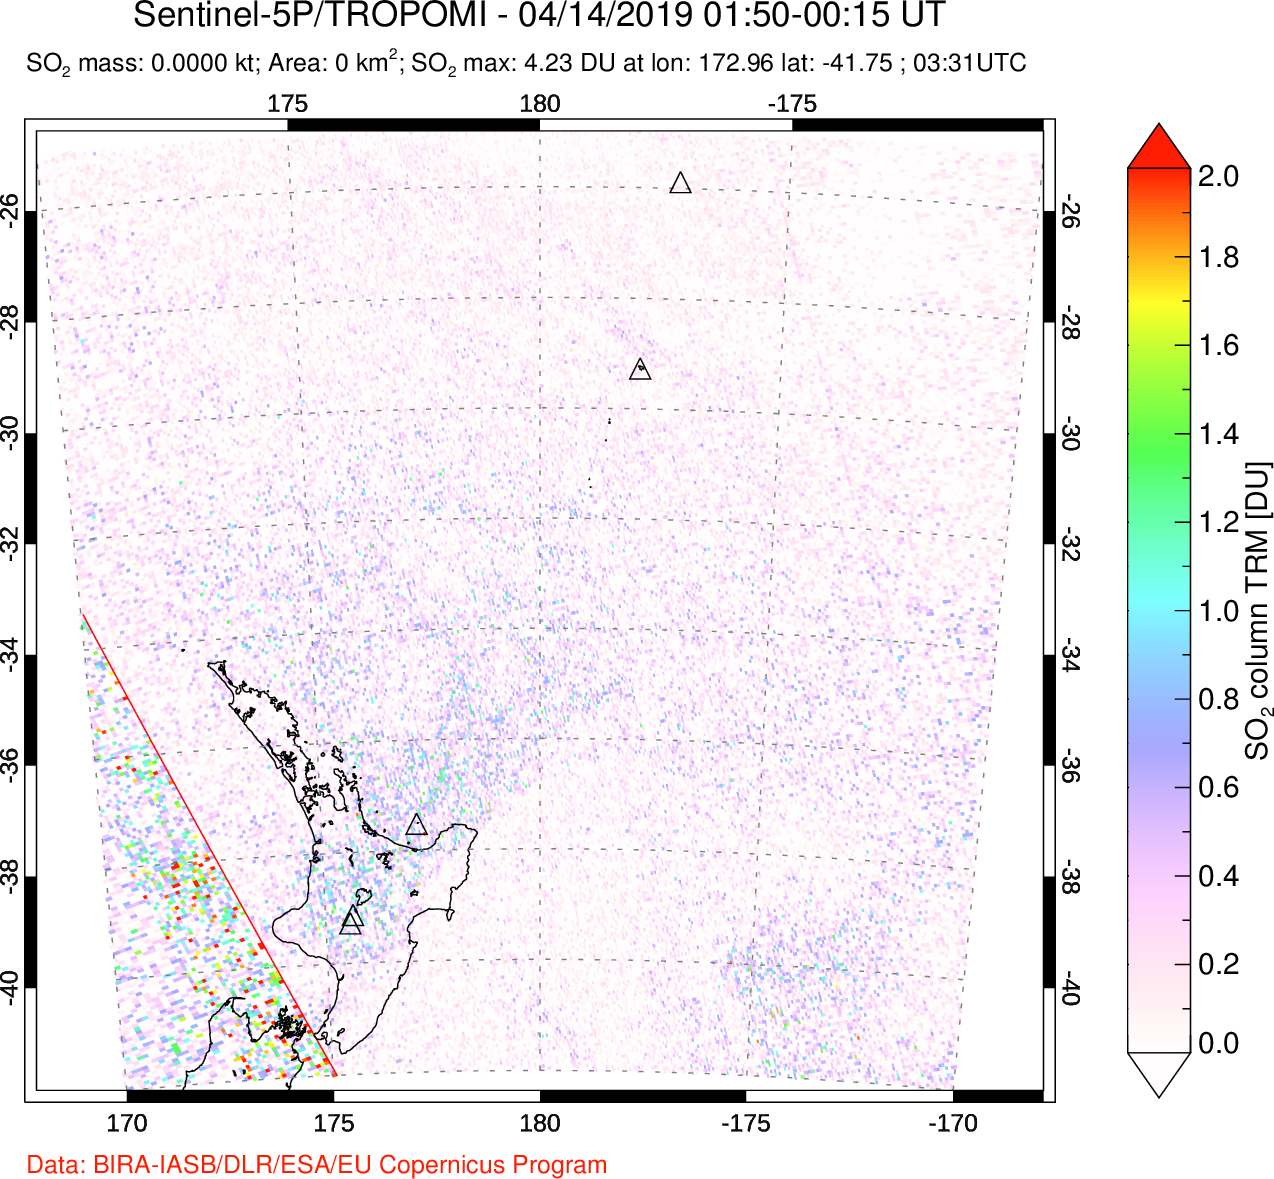 A sulfur dioxide image over New Zealand on Apr 14, 2019.